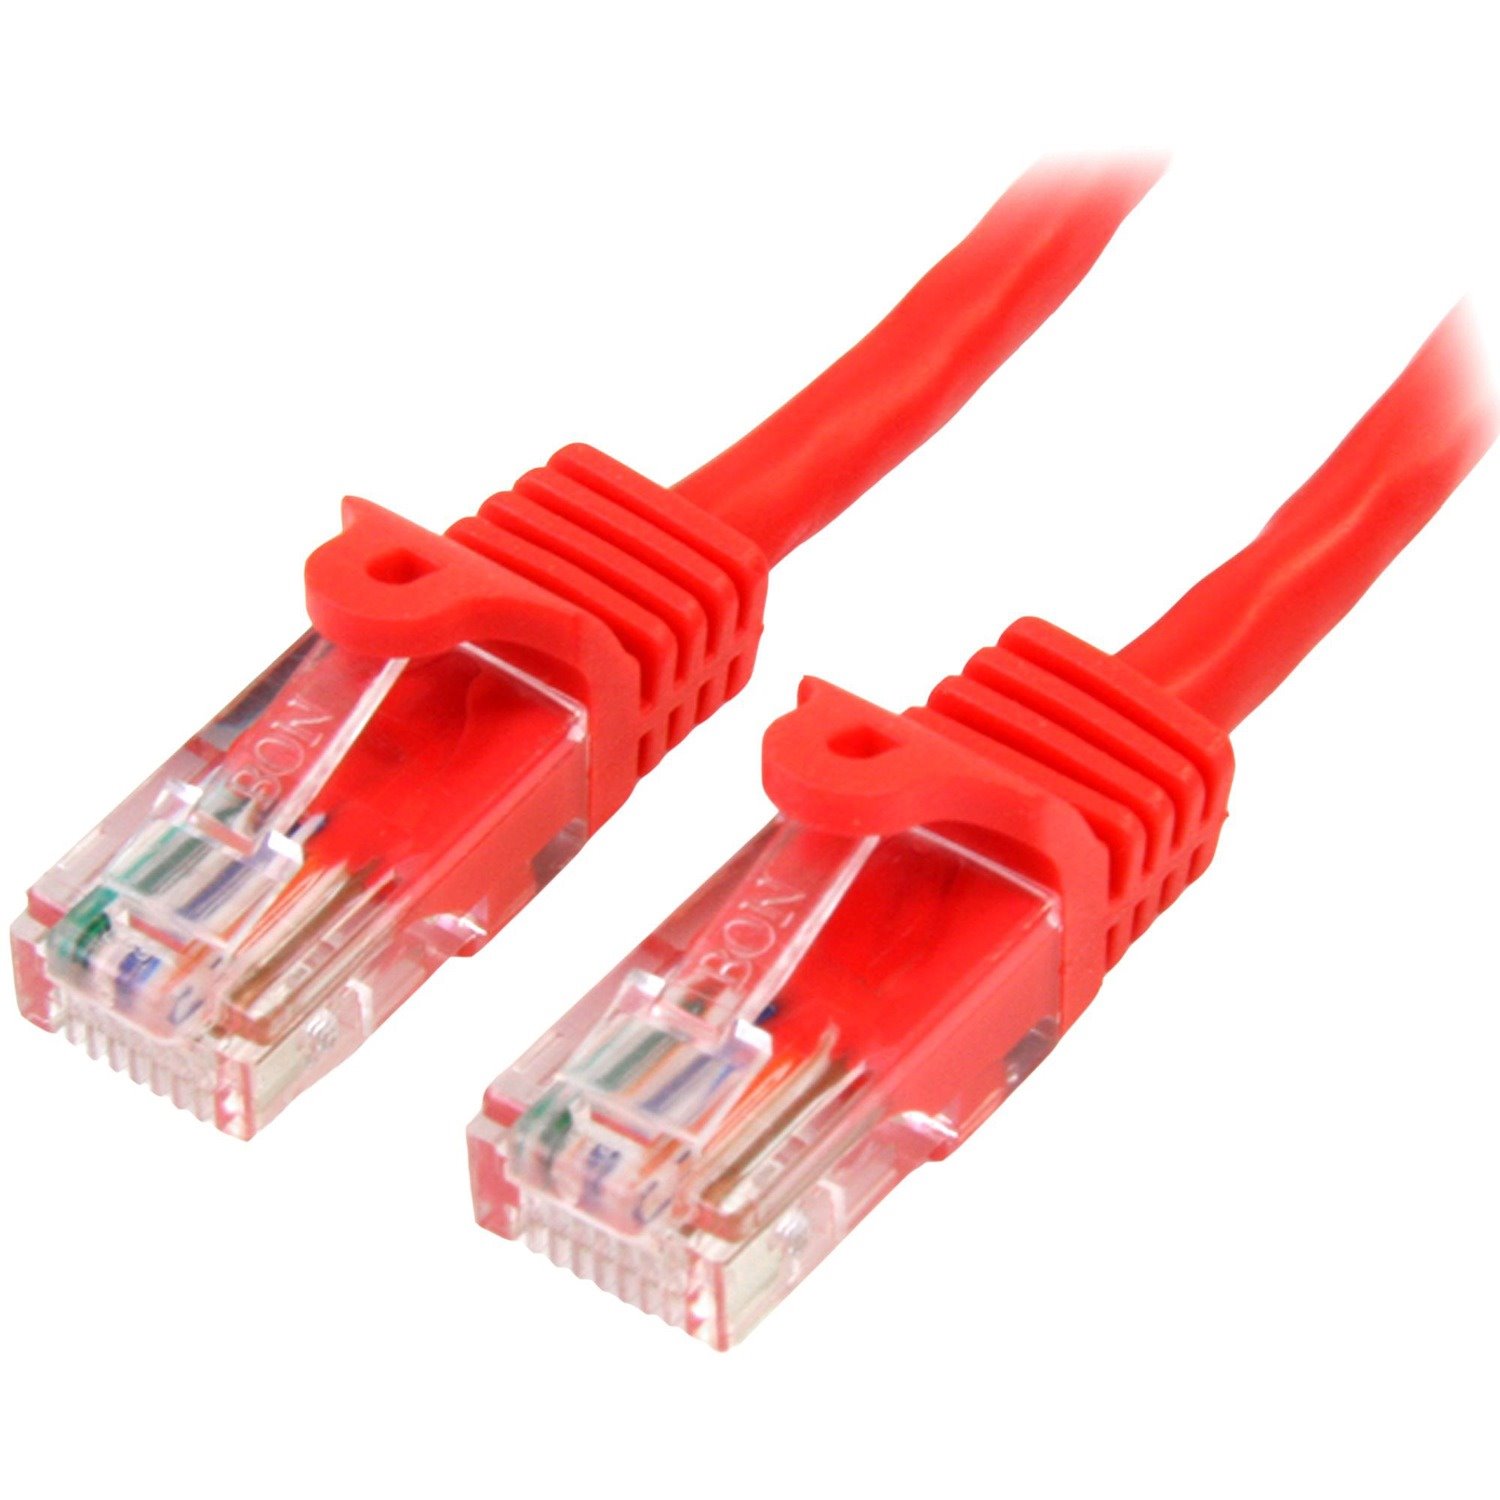 StarTech.com 3 m Red Cat5e Snagless RJ45 UTP Patch Cable - 3m Patch Cord